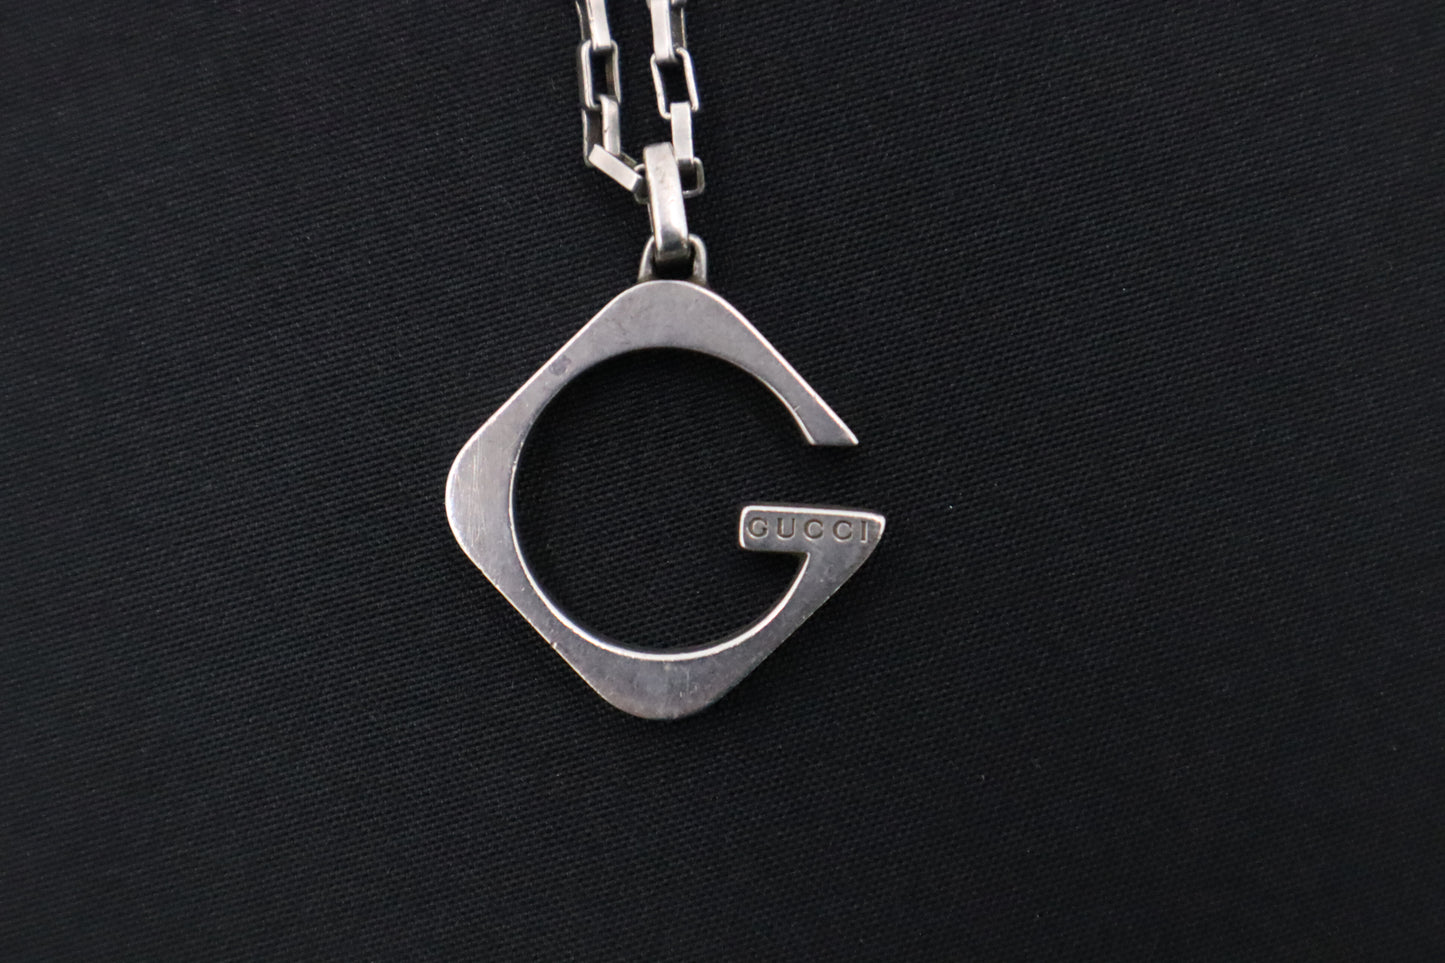 Gucci "G" Necklace in Sterling Silver